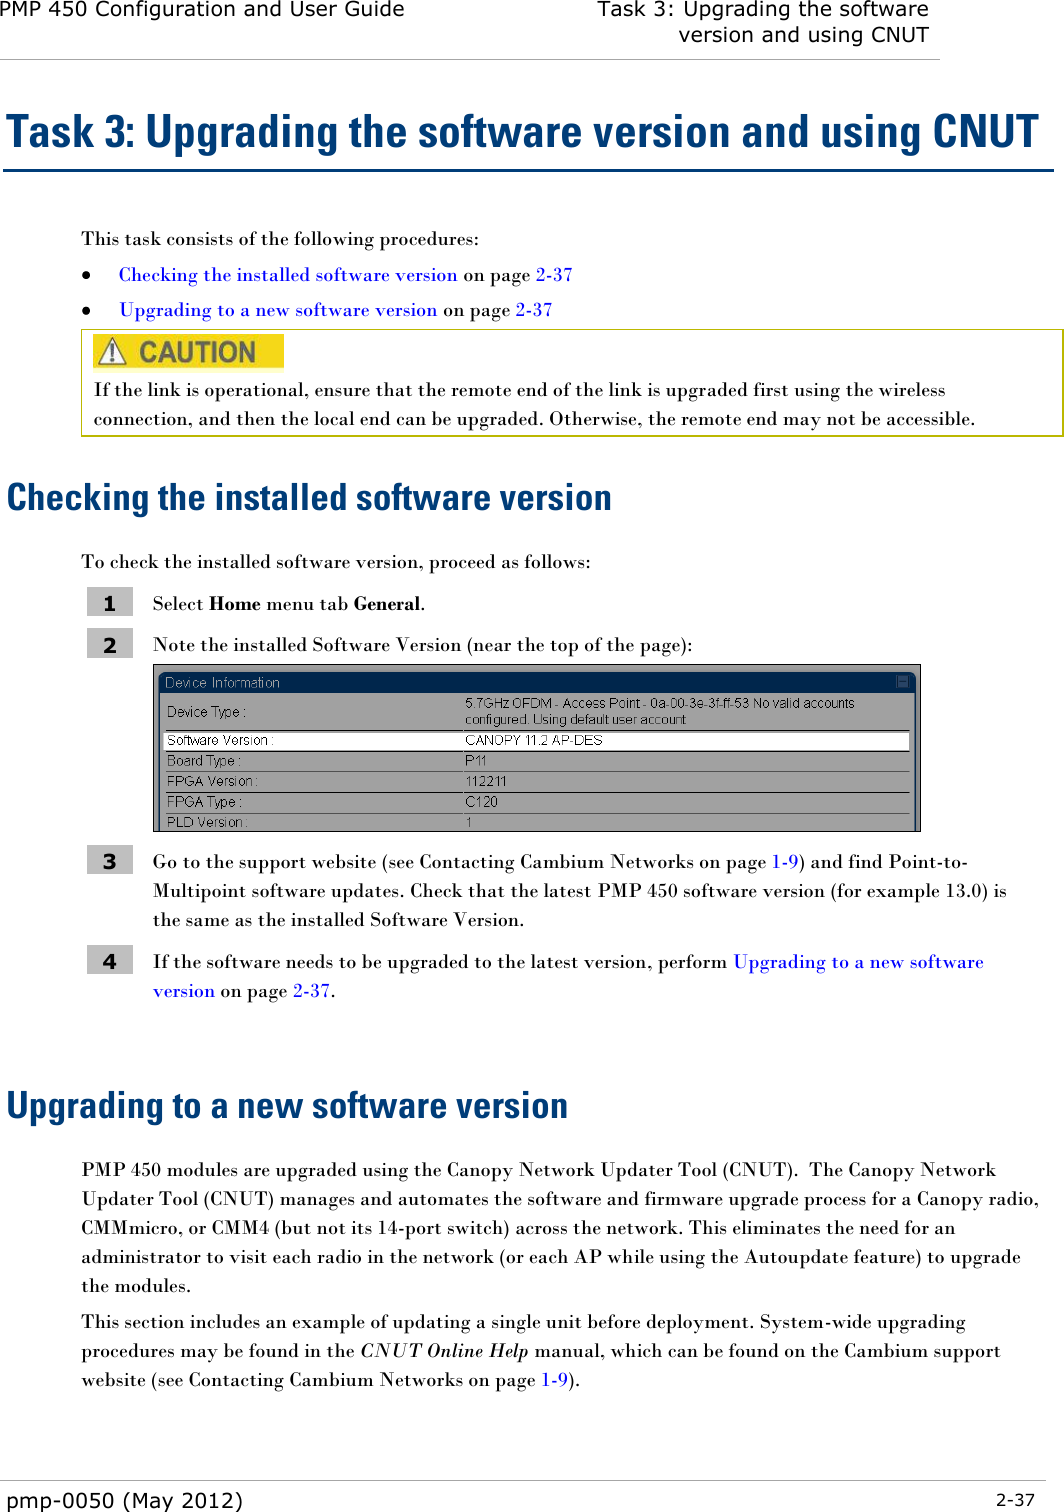 PMP 450 Configuration and User Guide Task 3: Upgrading the software version and using CNUT  pmp-0050 (May 2012)  2-37  Task 3: Upgrading the software version and using CNUT This task consists of the following procedures:  Checking the installed software version on page 2-37  Upgrading to a new software version on page 2-37  If the link is operational, ensure that the remote end of the link is upgraded first using the wireless connection, and then the local end can be upgraded. Otherwise, the remote end may not be accessible. Checking the installed software version To check the installed software version, proceed as follows: 1 Select Home menu tab General. 2 Note the installed Software Version (near the top of the page):  3 Go to the support website (see Contacting Cambium Networks on page 1-9) and find Point-to-Multipoint software updates. Check that the latest PMP 450 software version (for example 13.0) is the same as the installed Software Version. 4 If the software needs to be upgraded to the latest version, perform Upgrading to a new software version on page 2-37.  Upgrading to a new software version PMP 450 modules are upgraded using the Canopy Network Updater Tool (CNUT).  The Canopy Network Updater Tool (CNUT) manages and automates the software and firmware upgrade process for a Canopy radio, CMMmicro, or CMM4 (but not its 14-port switch) across the network. This eliminates the need for an administrator to visit each radio in the network (or each AP while using the Autoupdate feature) to upgrade the modules.  This section includes an example of updating a single unit before deployment. System-wide upgrading procedures may be found in the CNUT Online Help manual, which can be found on the Cambium support website (see Contacting Cambium Networks on page 1-9). 